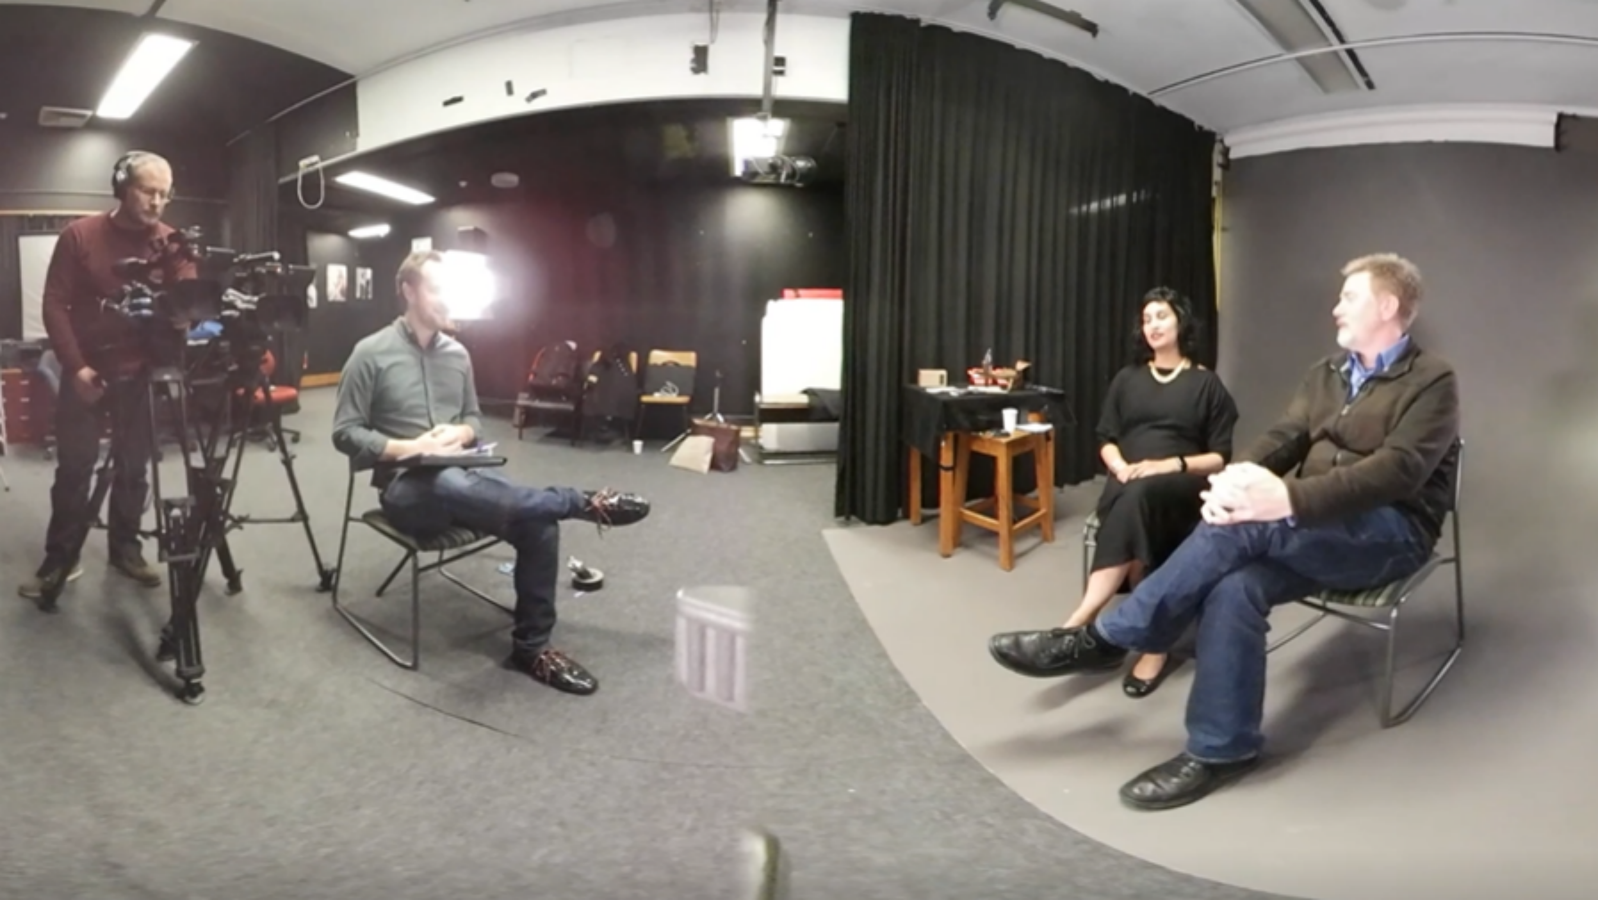 Screen capture from a 360-degree video of behind the scenes of Colliding Conversations interview